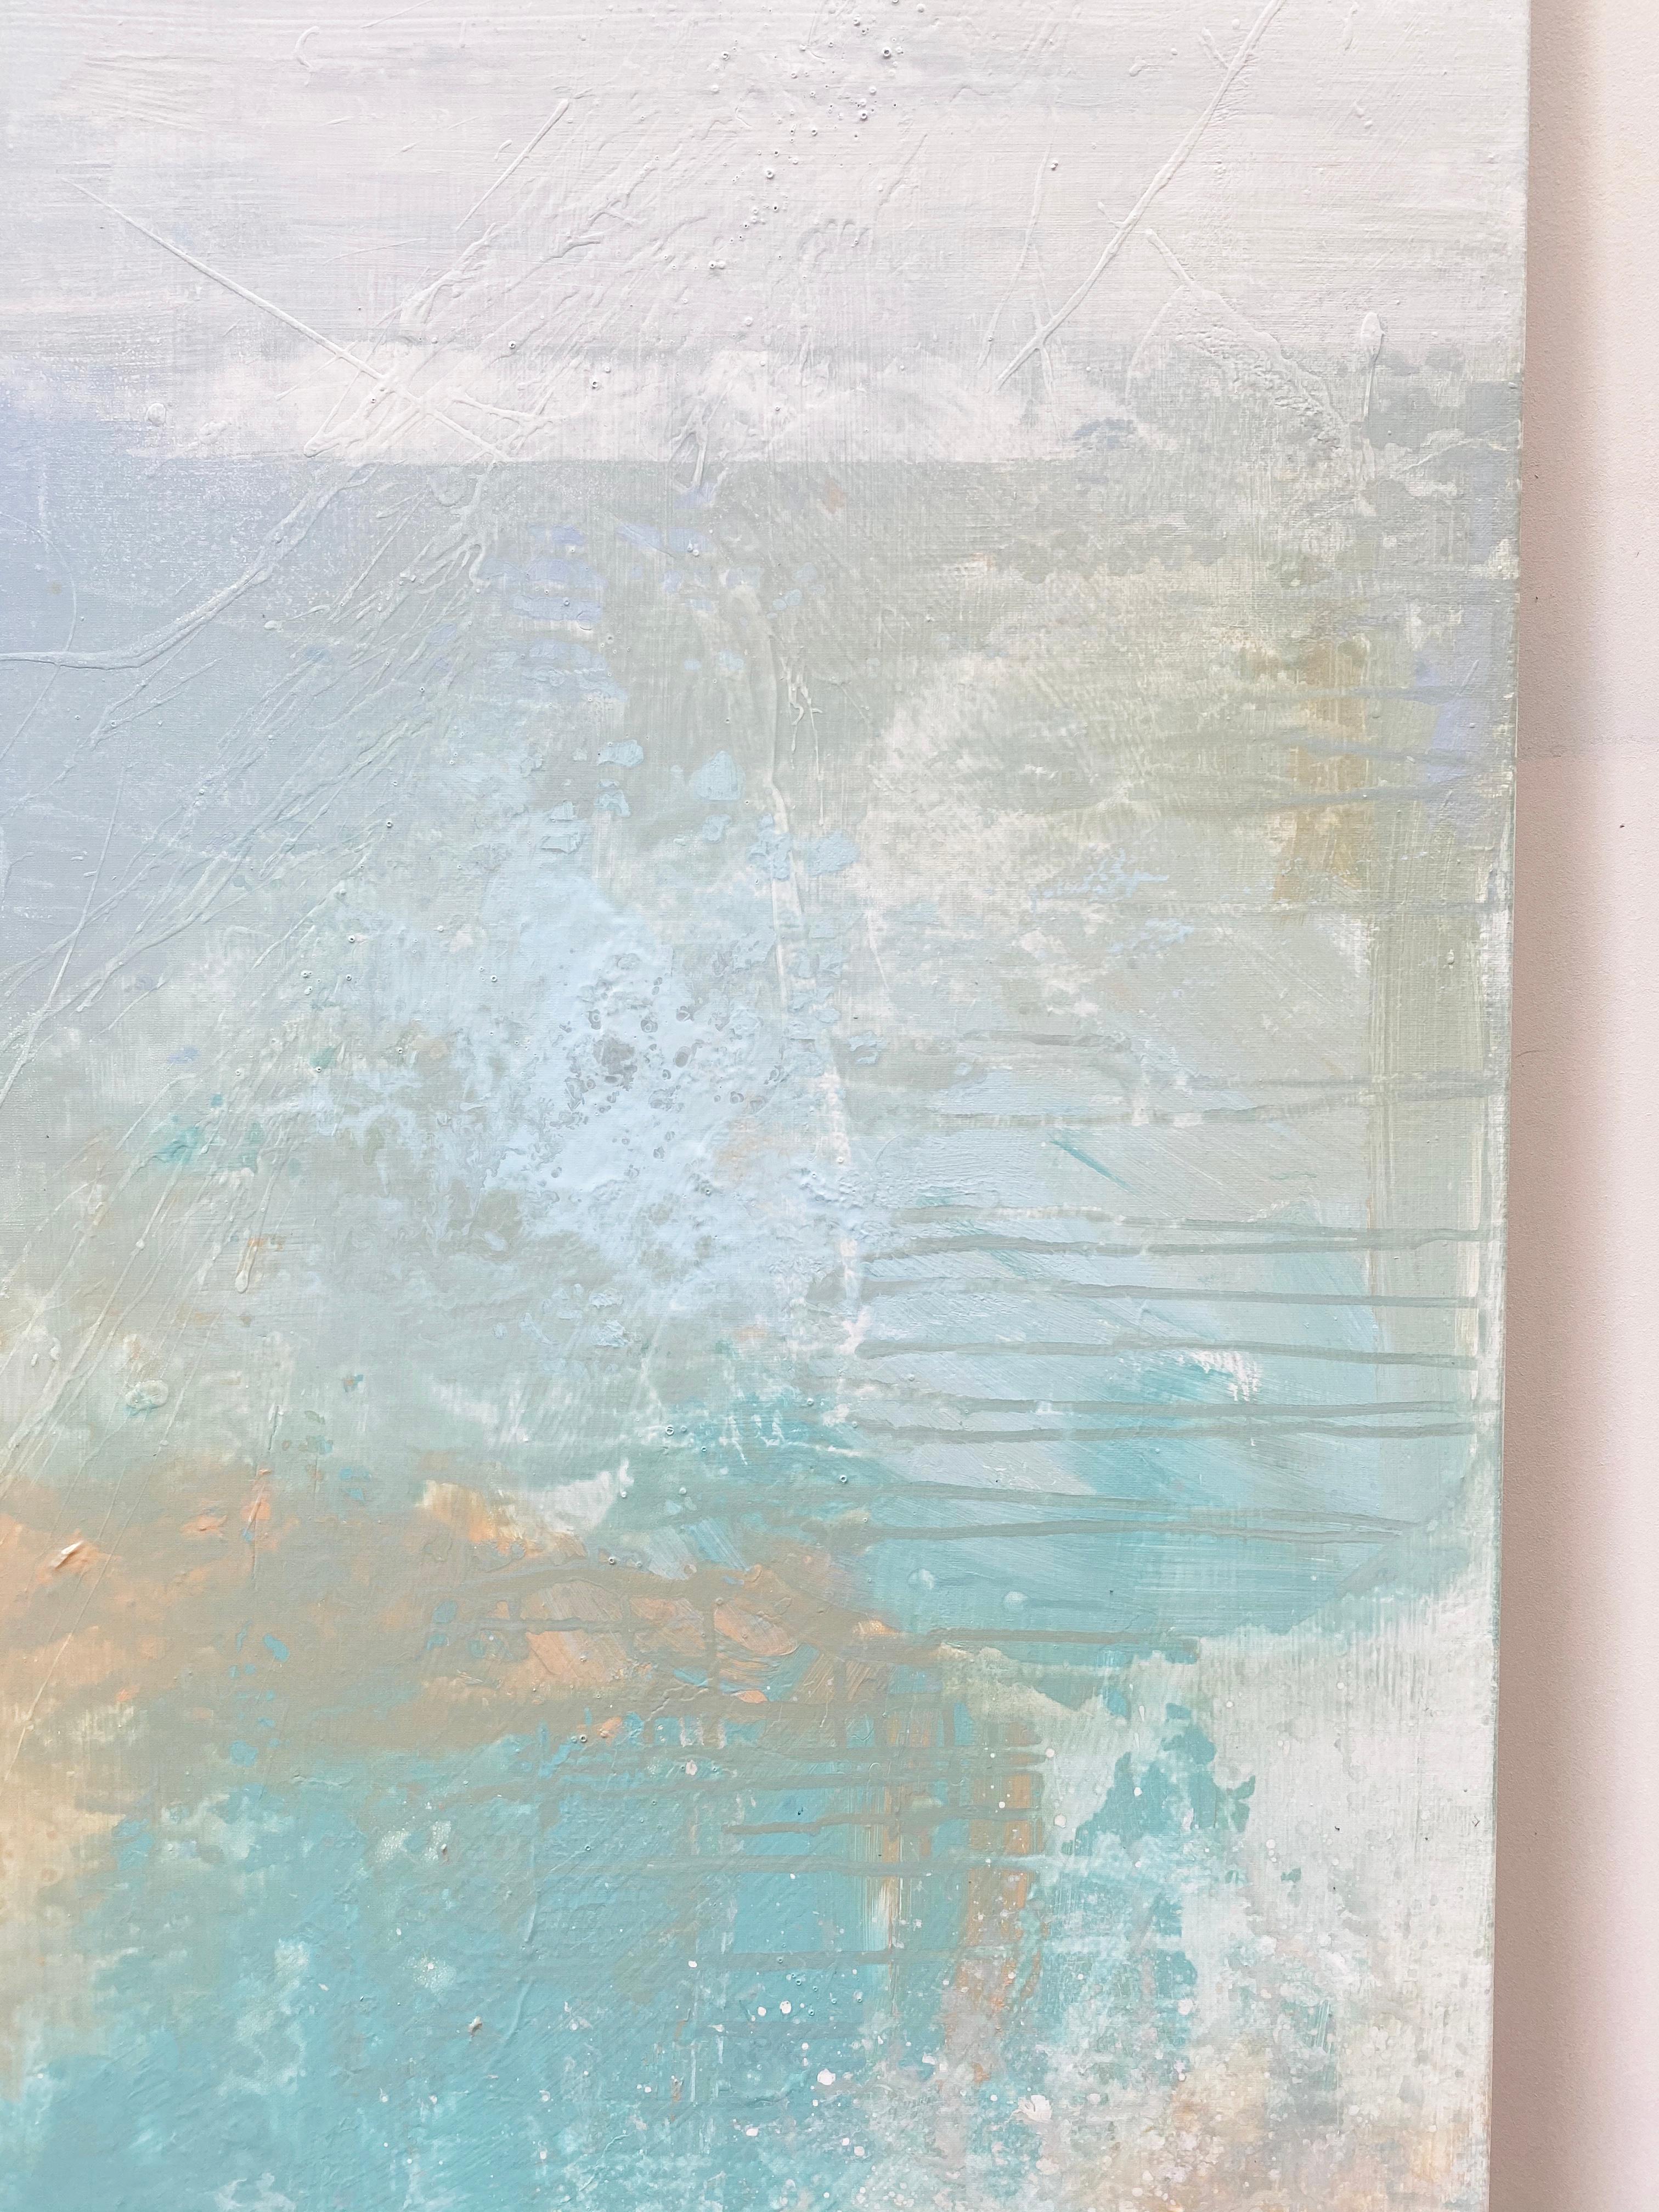 An illuminated abstract expressionist painting to fill your space with light and positive energy. Expressions of thick heavily layered textured paint and spatter in a delicate soft palette reveal bold energy, yet calming and soft at the same time.